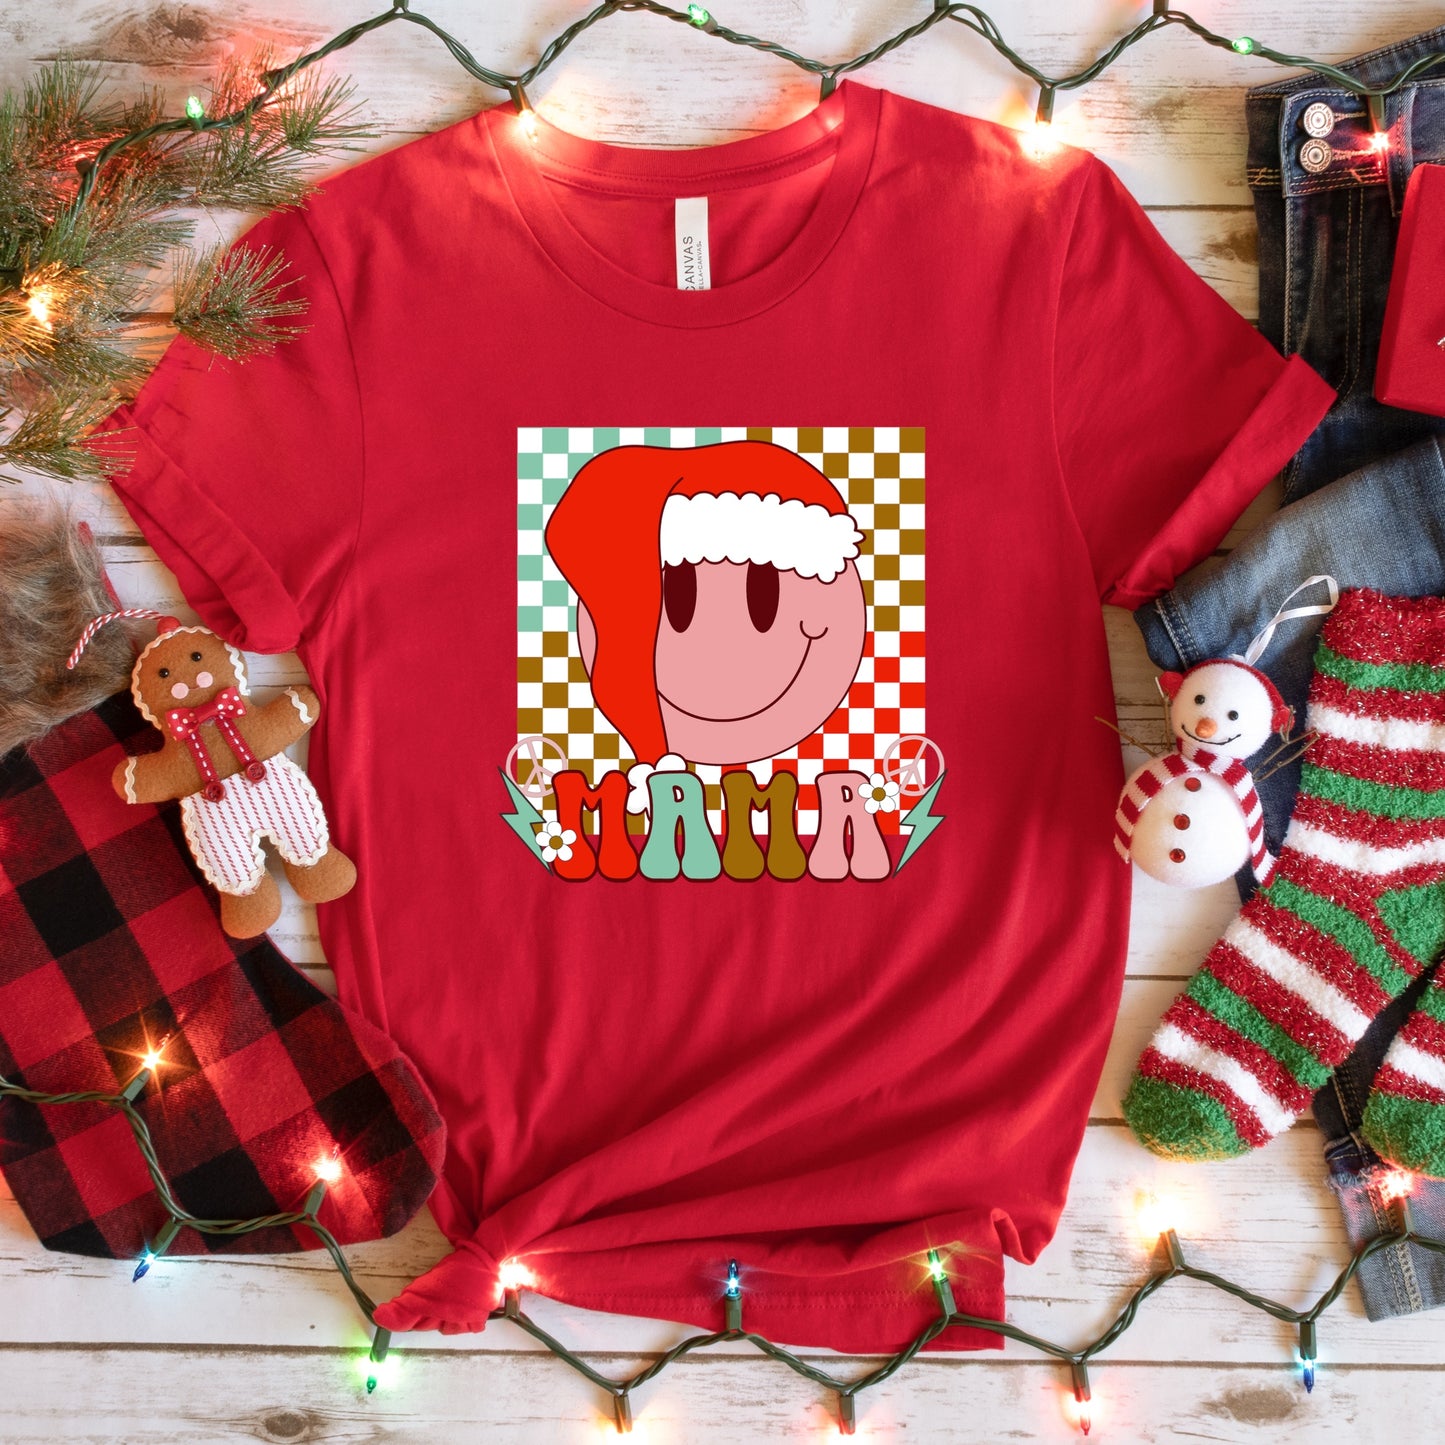 Christmas DTF and Sublimation that says "Mama"